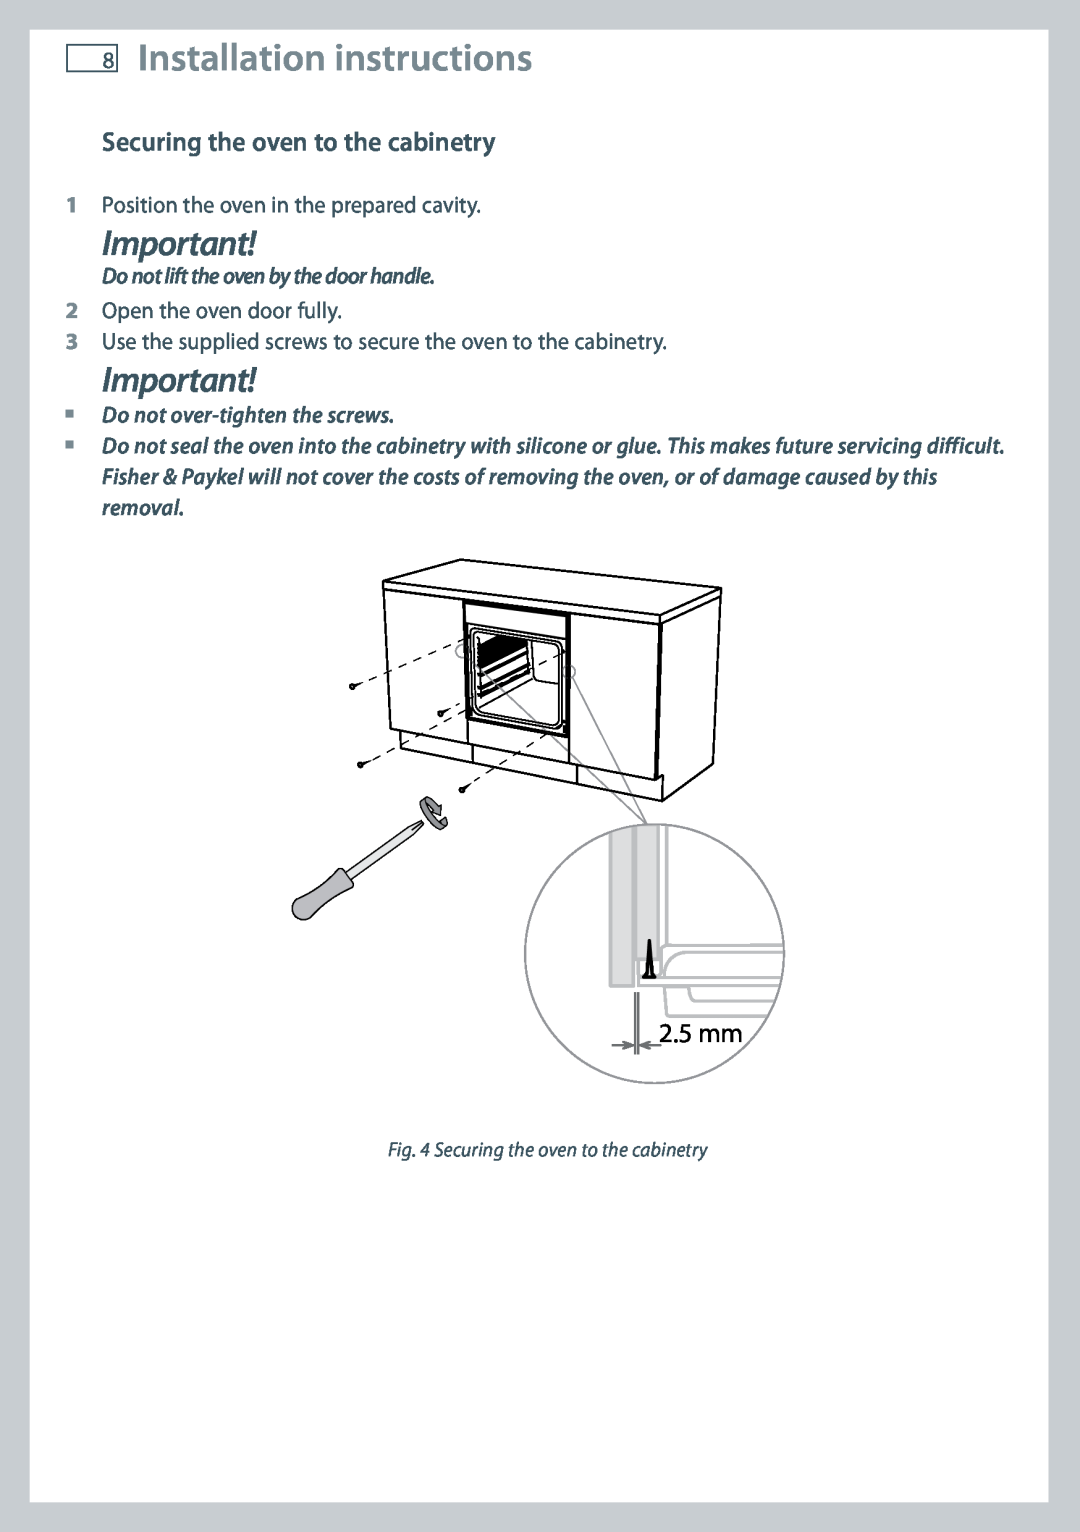 Fisher & Paykel OB60 Installation instructions, Securing the oven to the cabinetry, 2.5 mm, Do not over-tighten the screws 